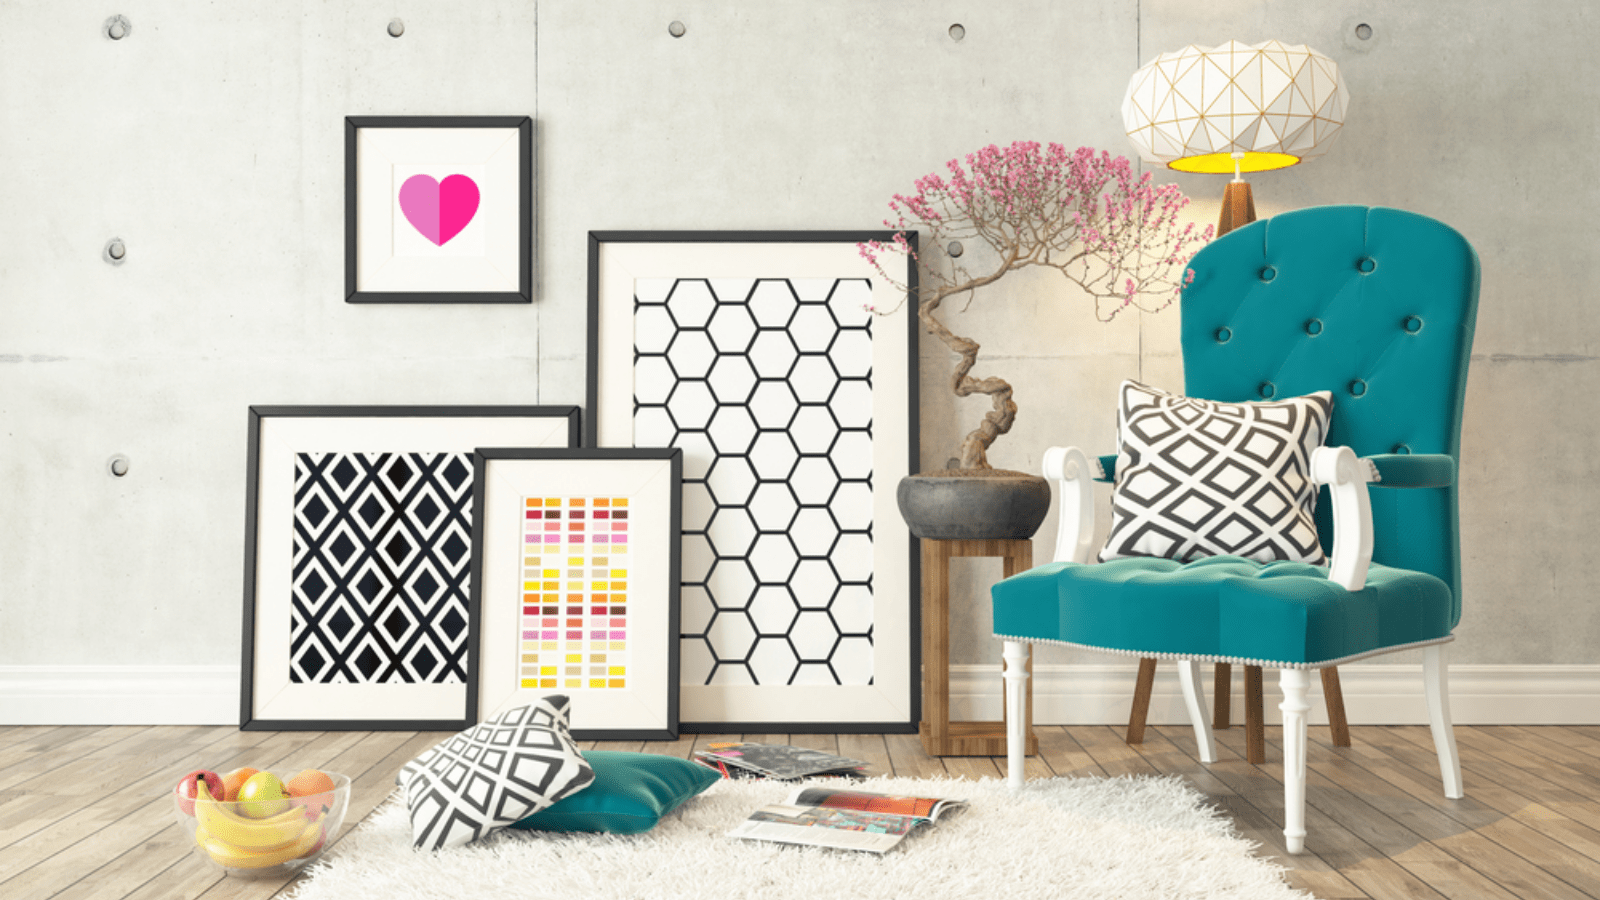 5 Biggest Urban Home Decor Trends of 2019